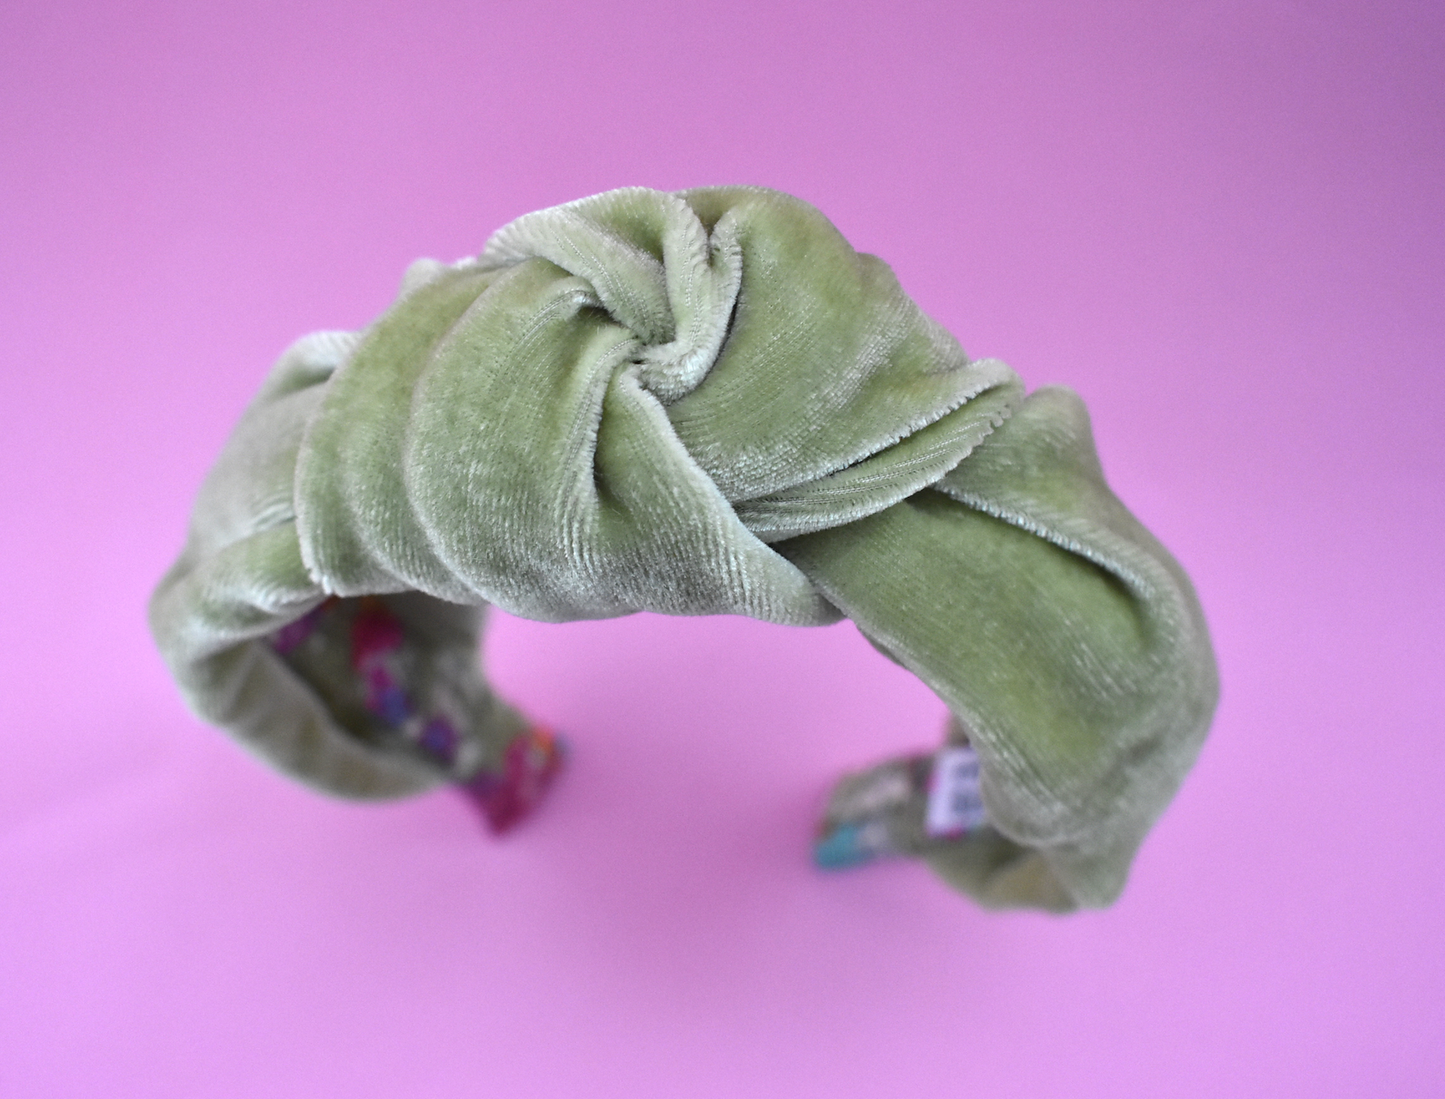 Silk-Velvet Alice band - Pistachio and Floral Liberty print - Tot Knots of Brighton